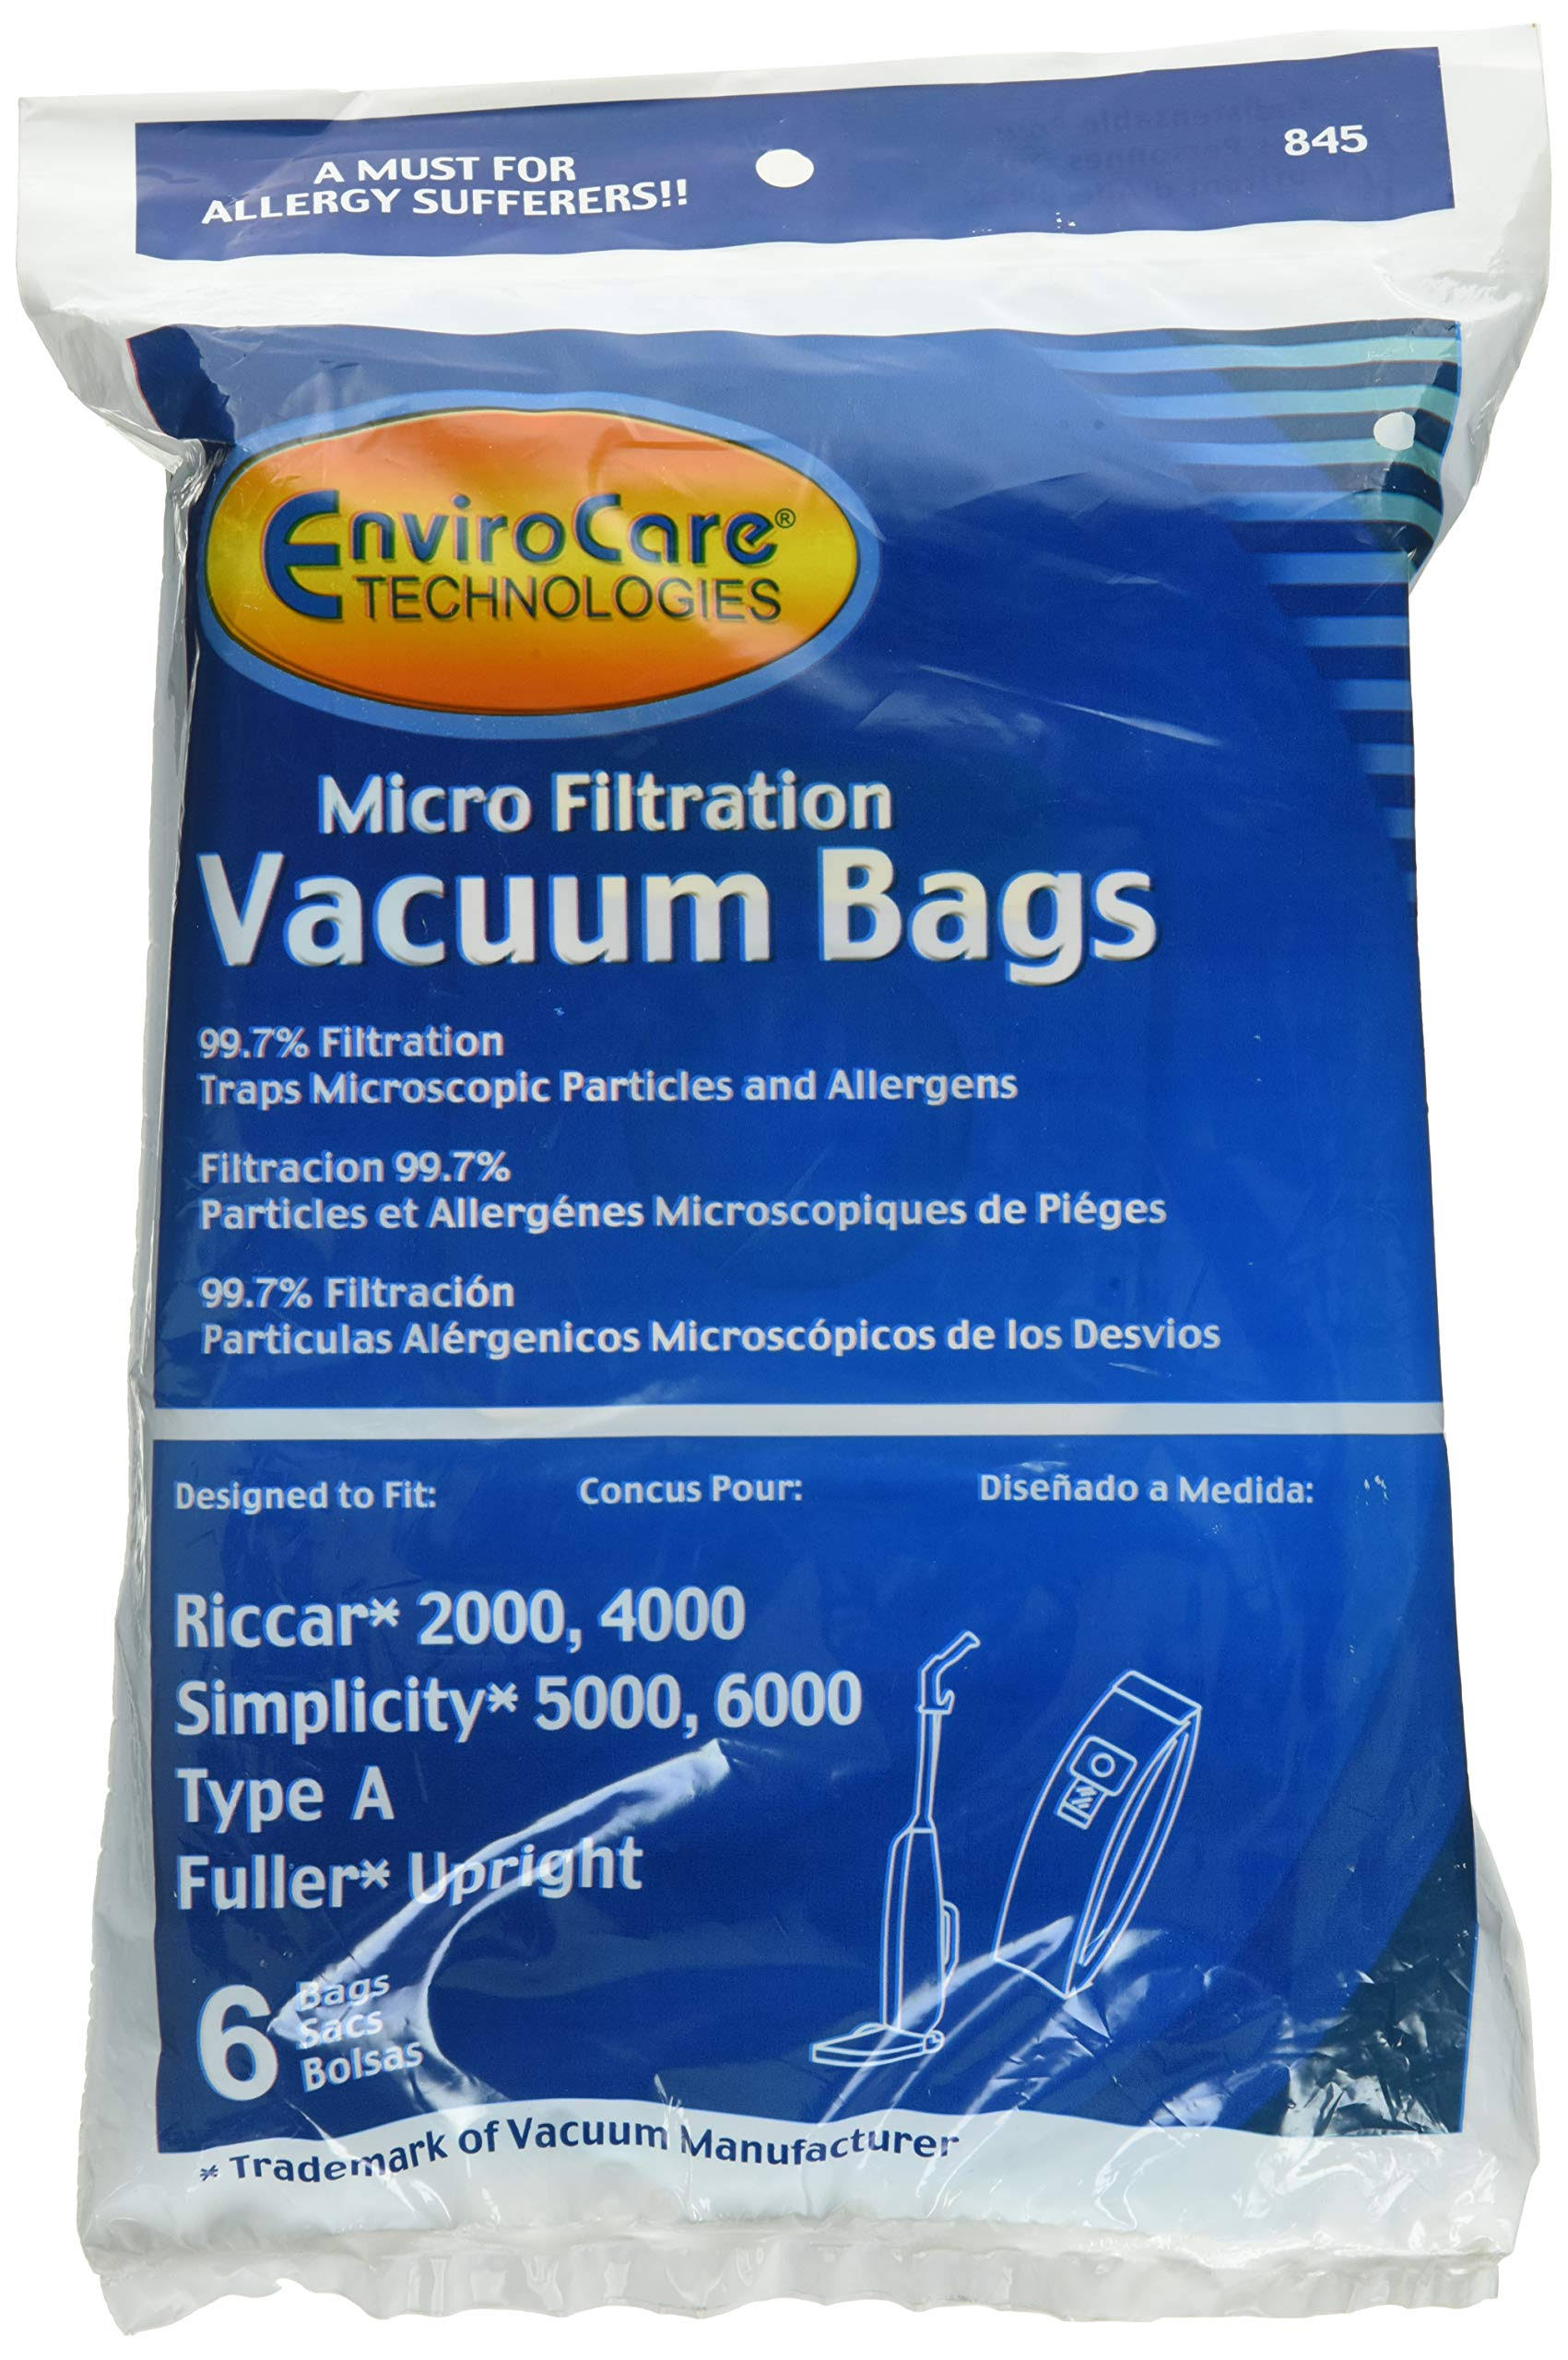 Riccar 2000, 4000 and Simplicity 5000, 6000 Type A Vacuum Bags